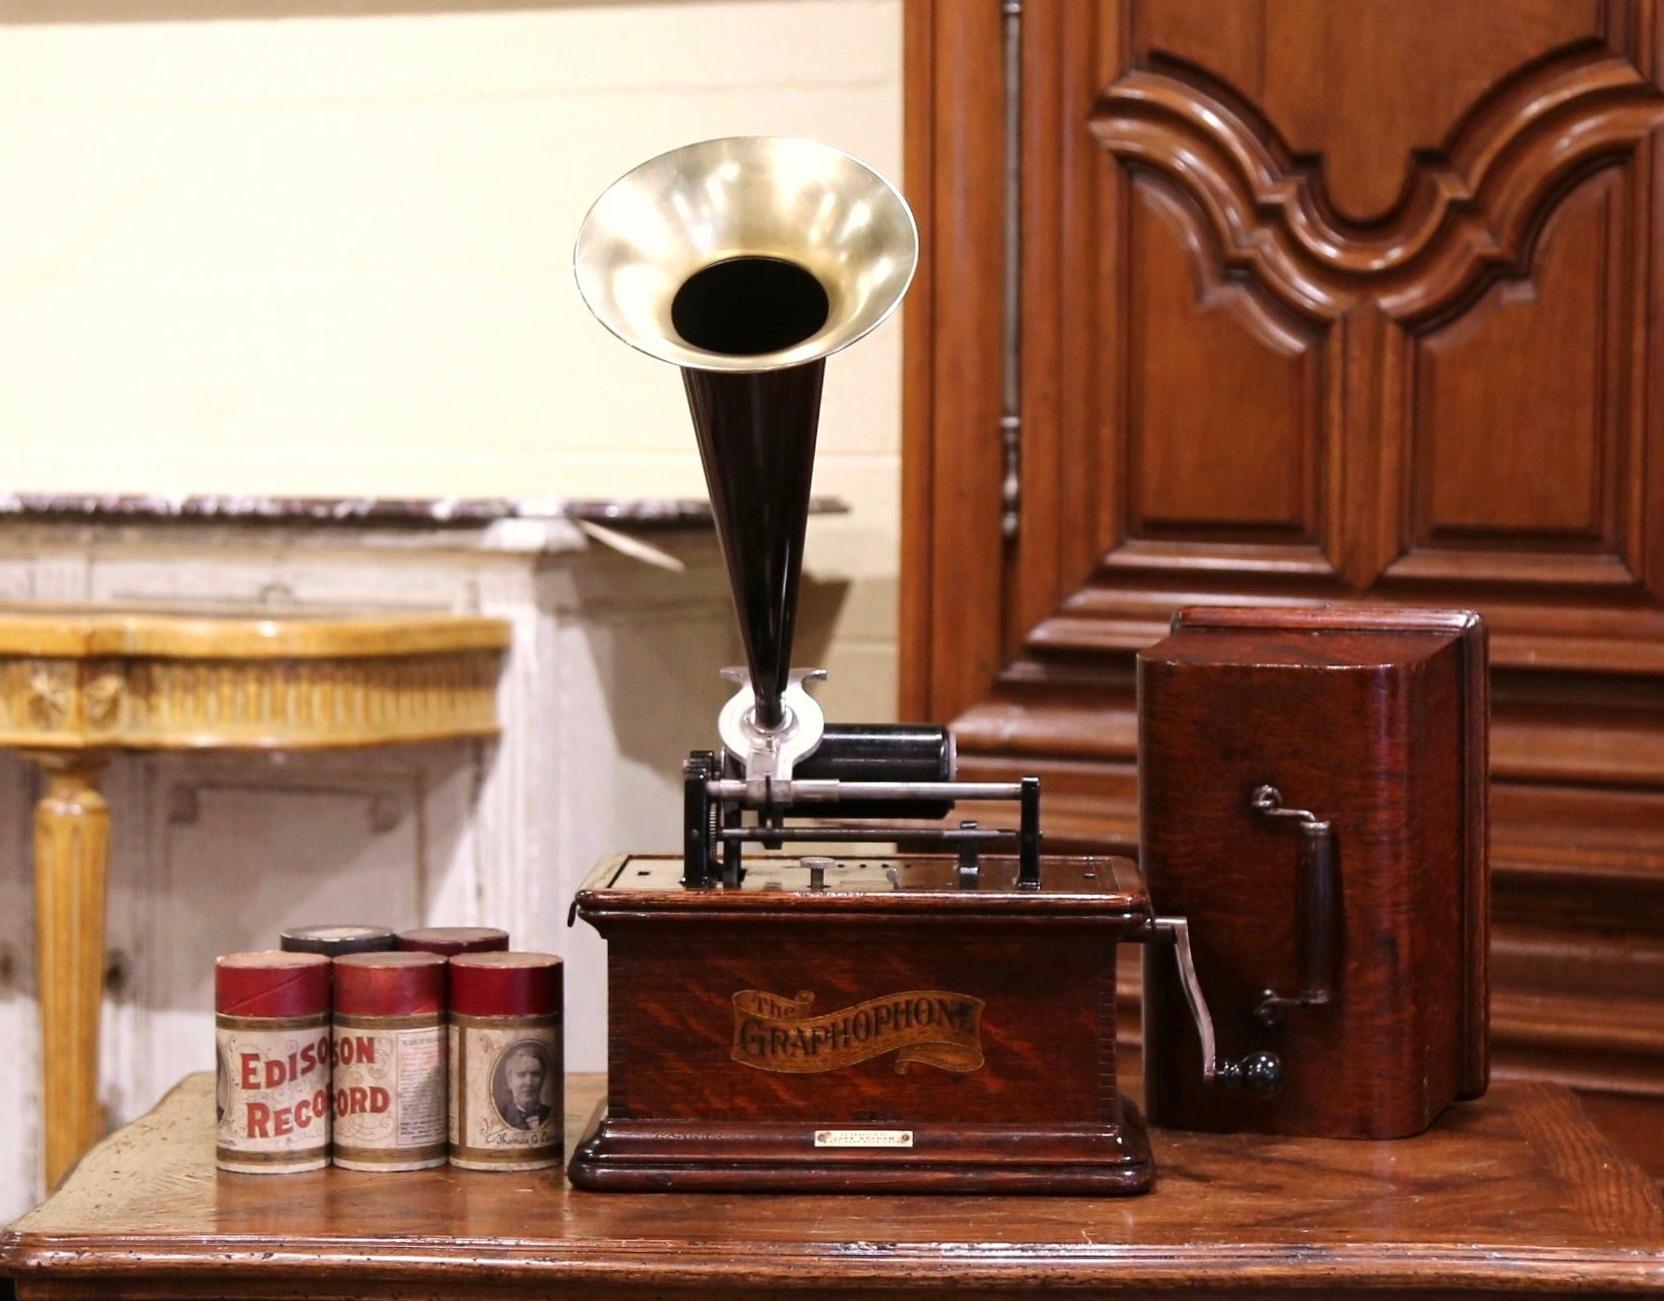 The first American cylinder talking machine! Crafted in New York circa 1890, this graphophone features the original oak casing, and five rolls of music. It is very good working order (check our attached video)
Originally know as the phonograph, the